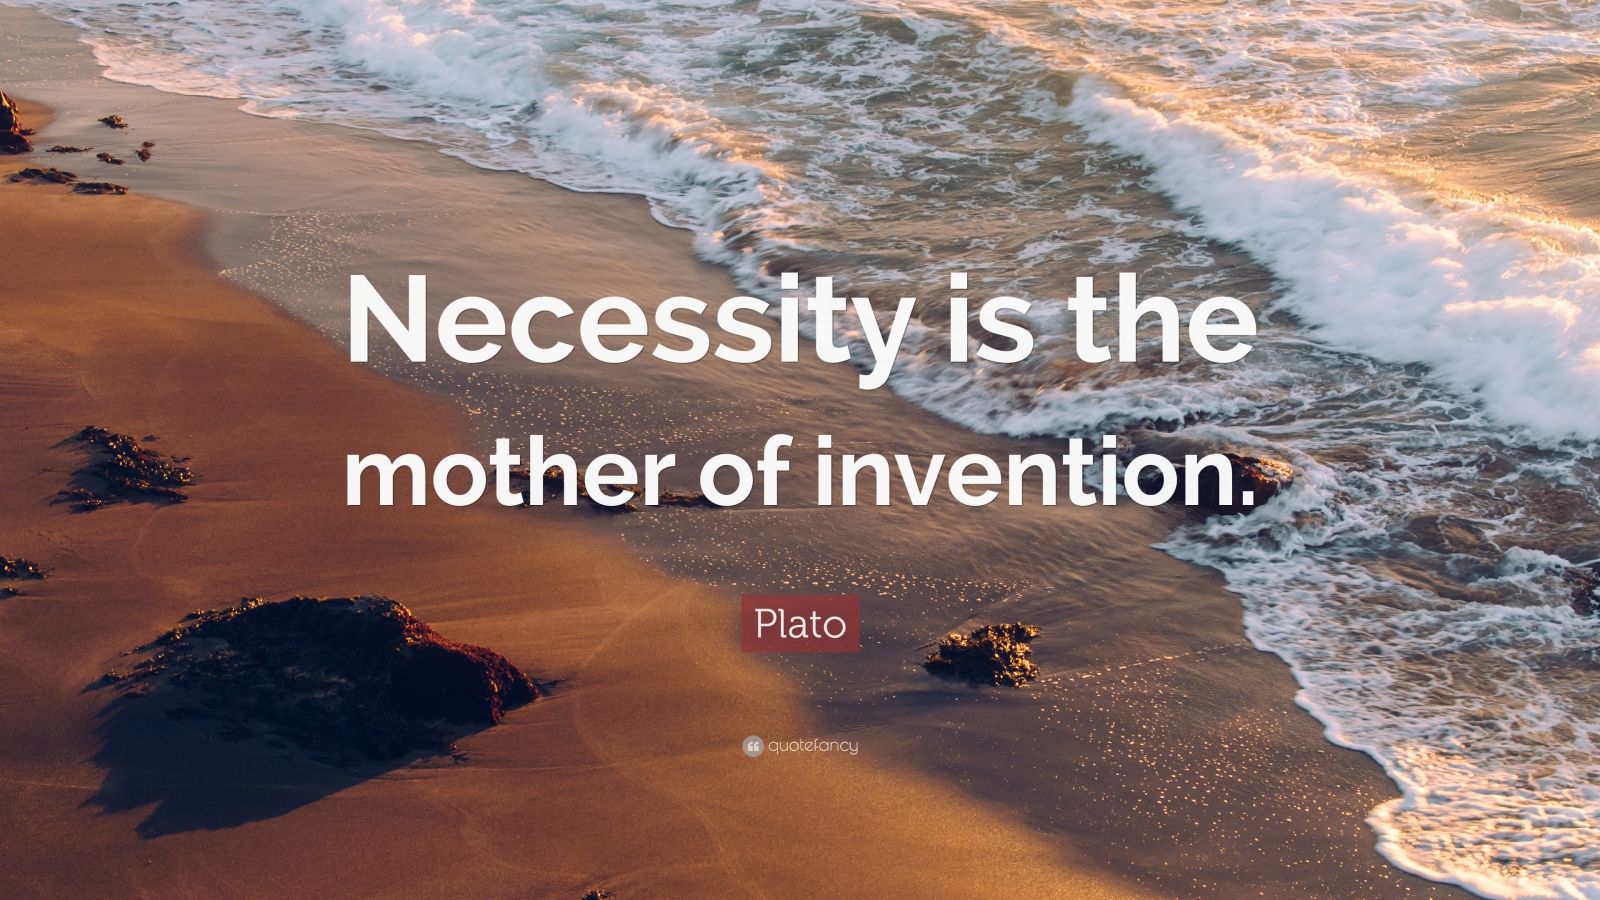 write an essay on necessity is the mother of invention